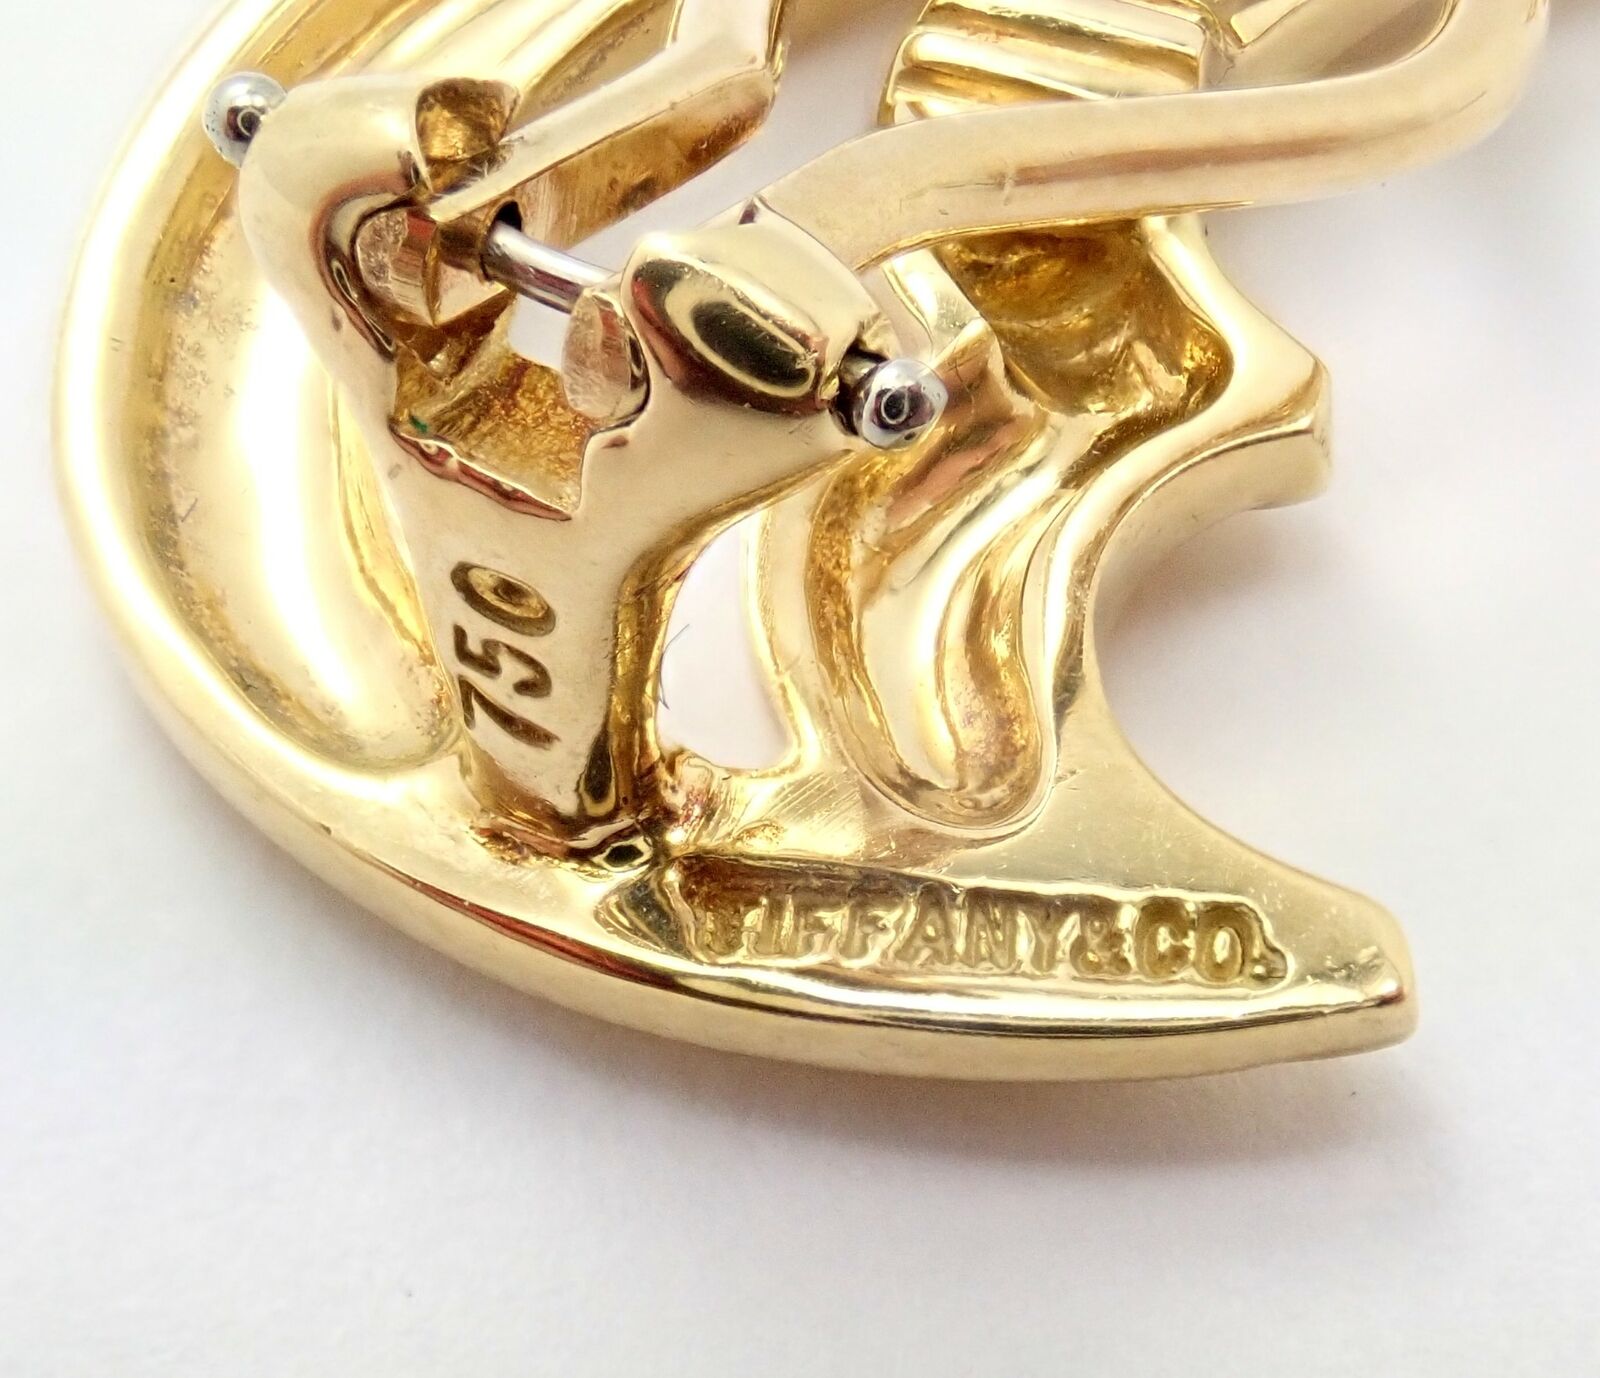 Tiffany & Co. Jewelry & Watches:Fine Jewelry:Earrings Authentic! Tiffany & Co Picasso 18k Yellow Gold Crescent Moon Large Earrings